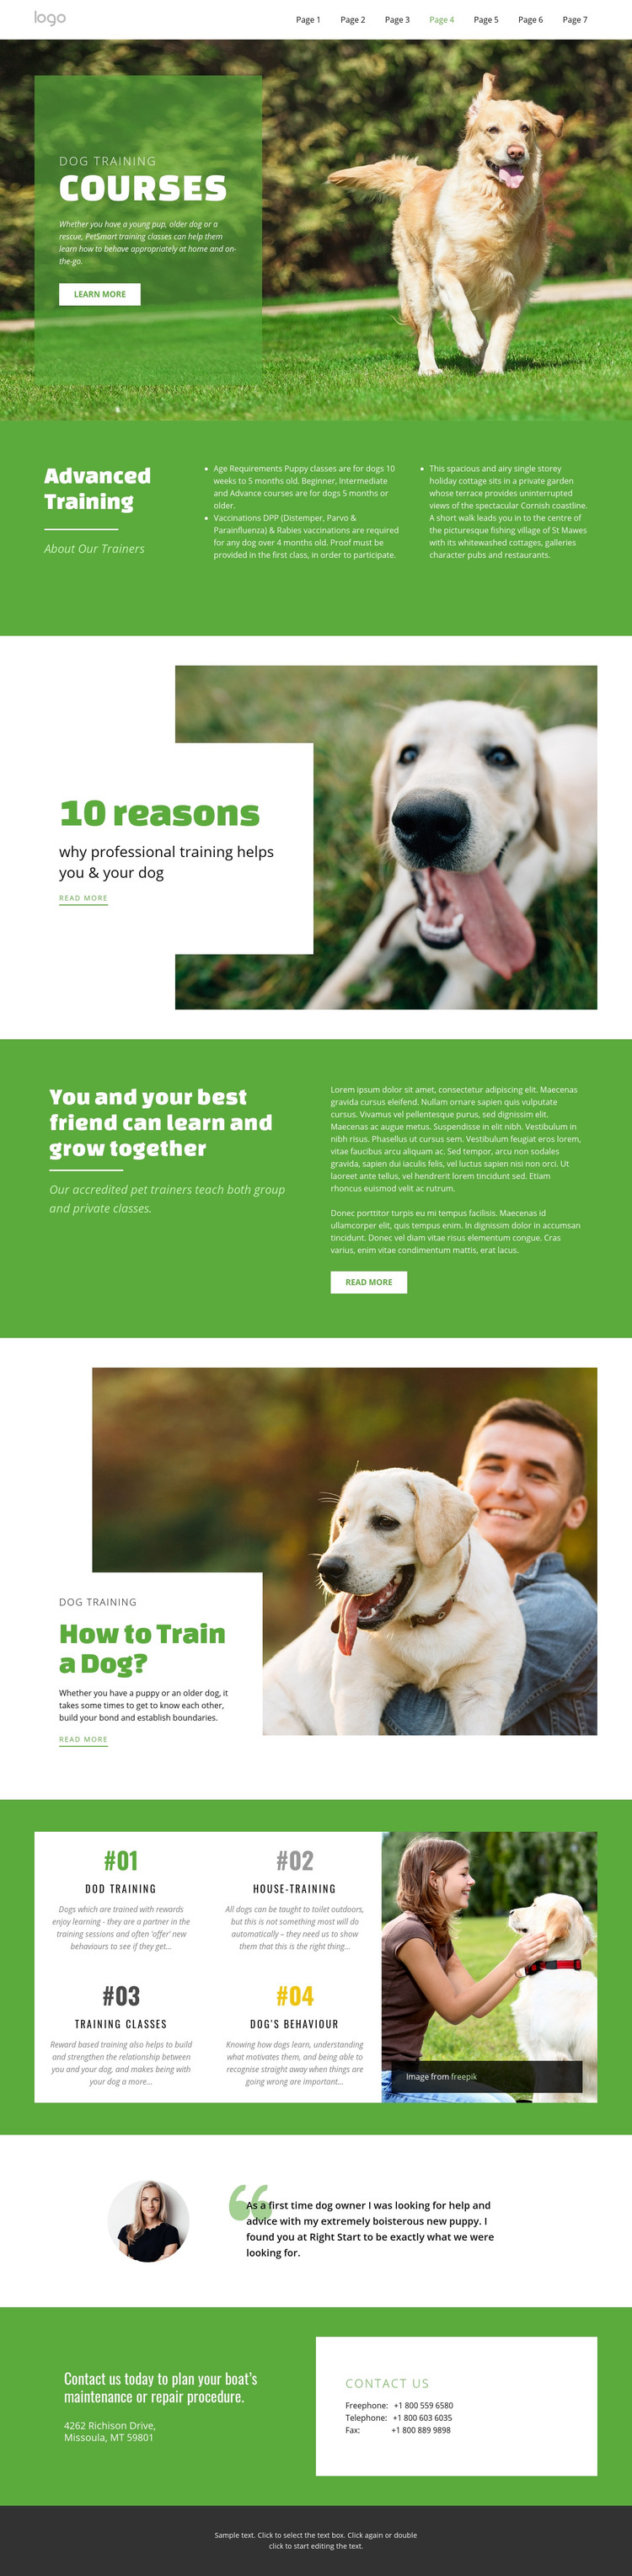 Training courses for pets Homepage Design